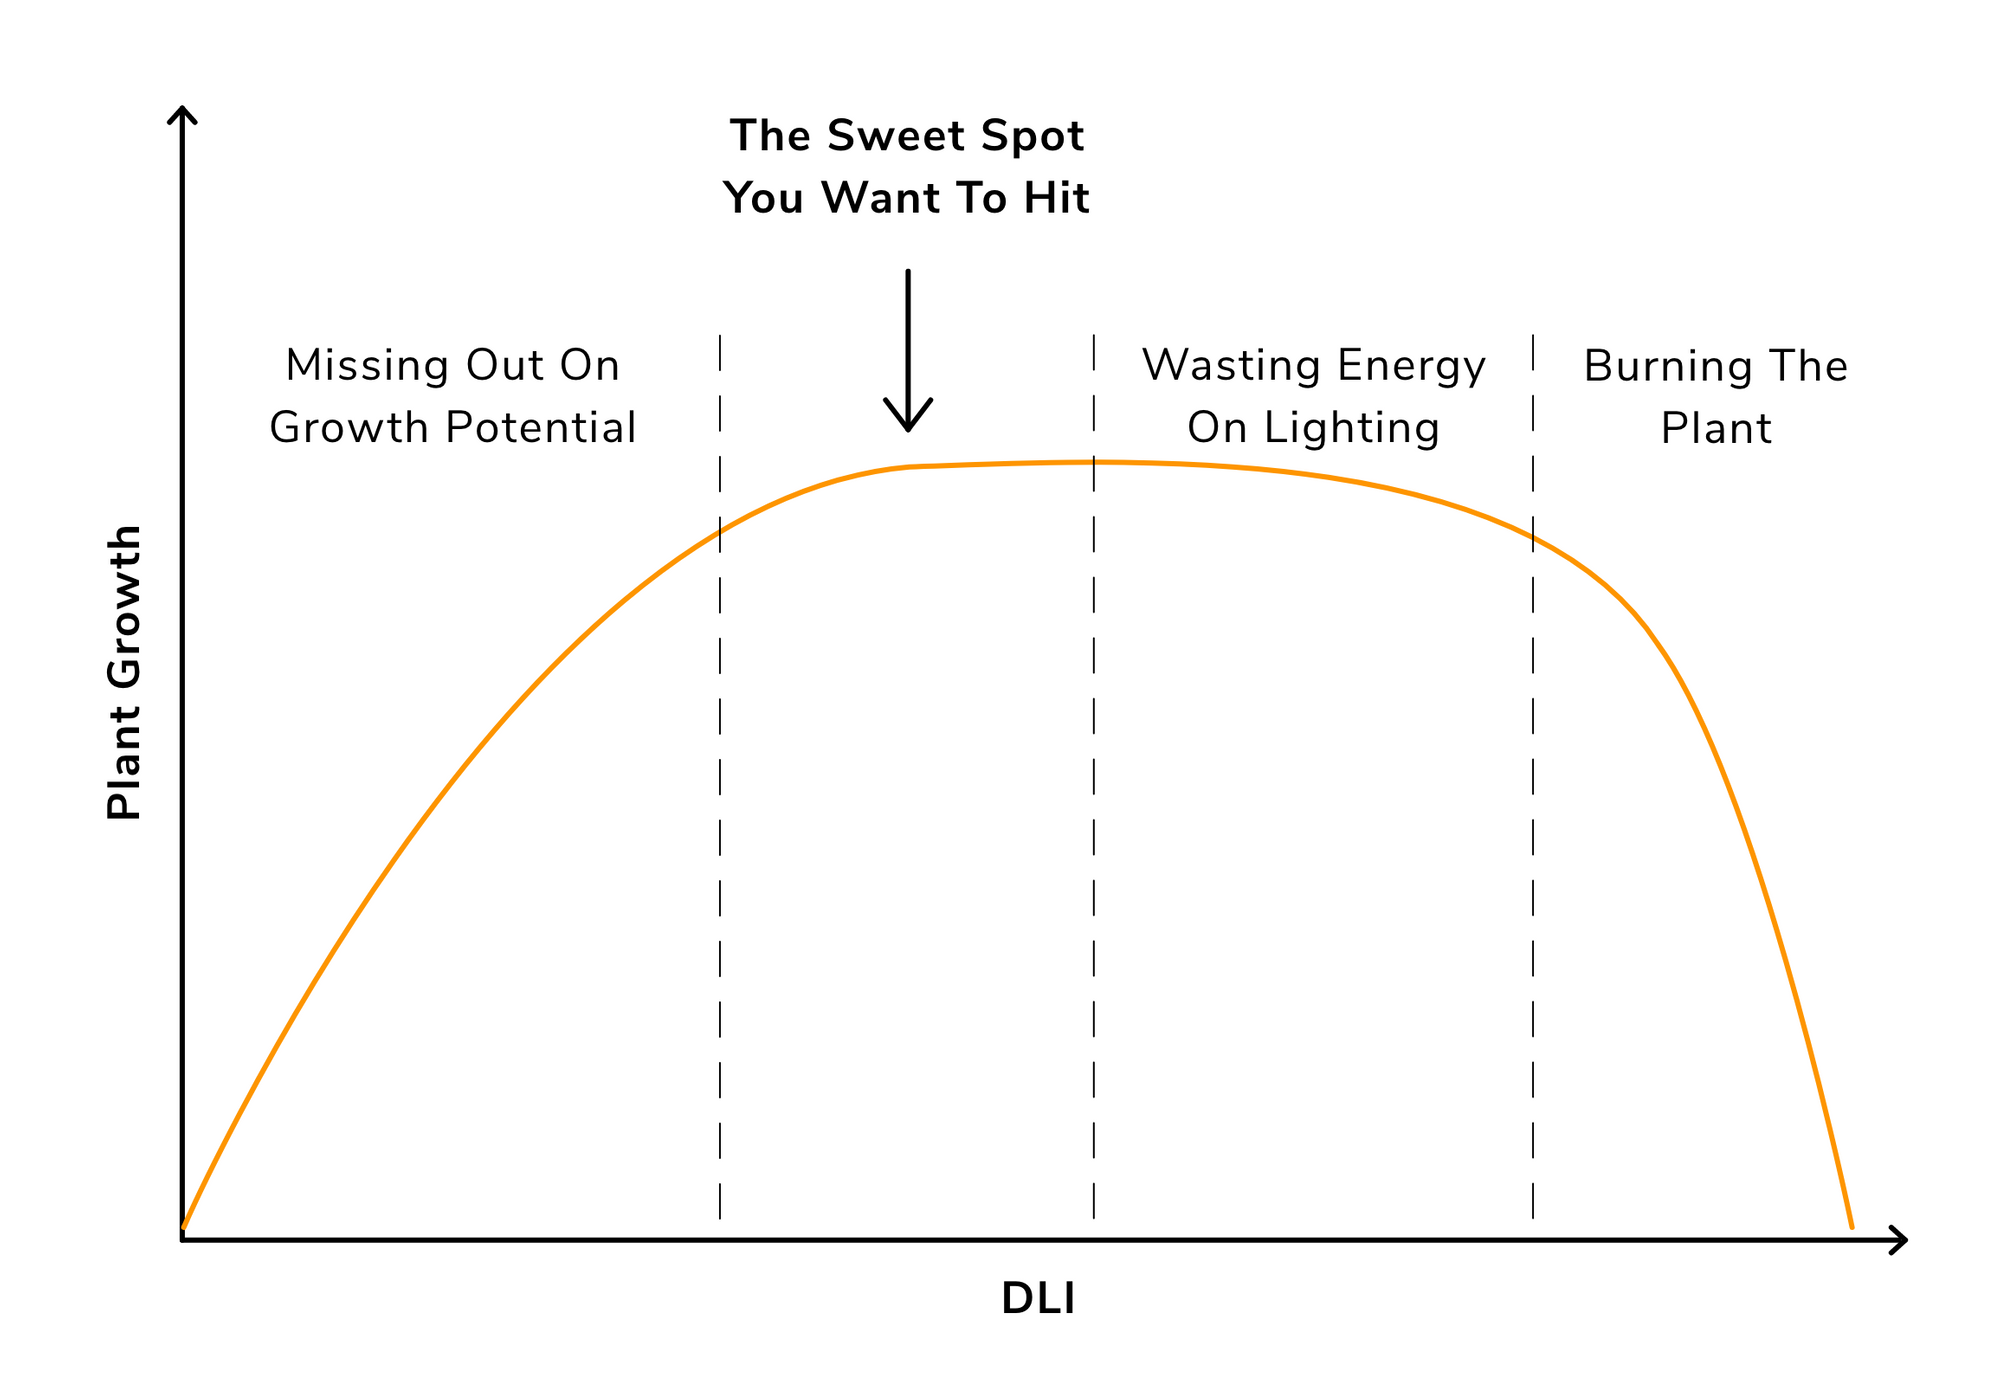 The Daily Light Integral of Plants